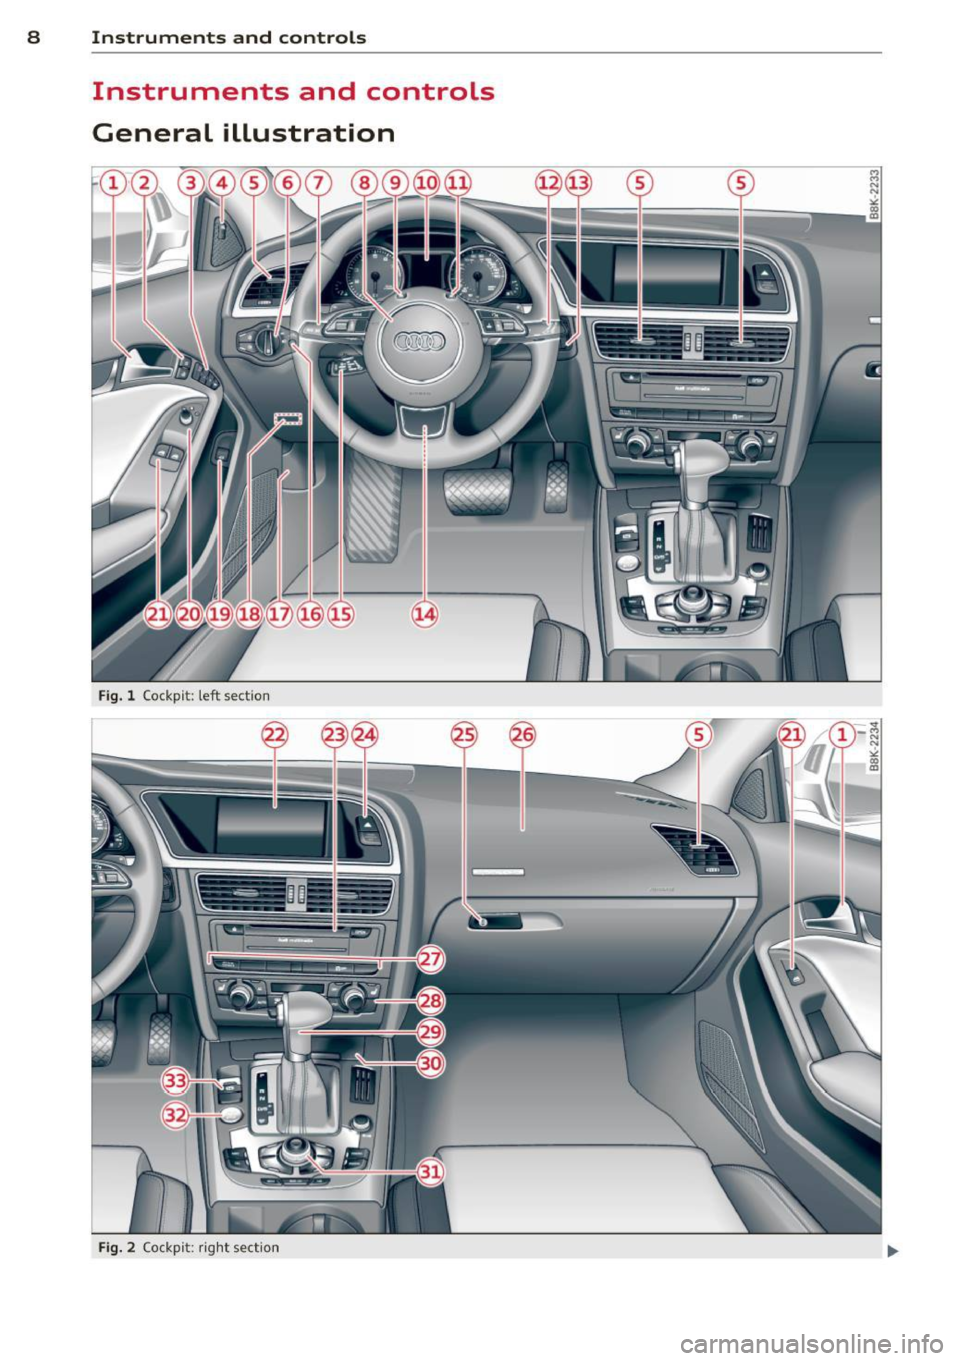 AUDI A5 COUPE 2013  Owners Manual 8  Instruments and controls 
Instruments  and  controls 
General  illustration 
Fig. l Cockp it:  left  sect io n 
---=- ---1 =----- -
- --
- --
Fig. 2 Cock pi t: ri ght  sect io n  